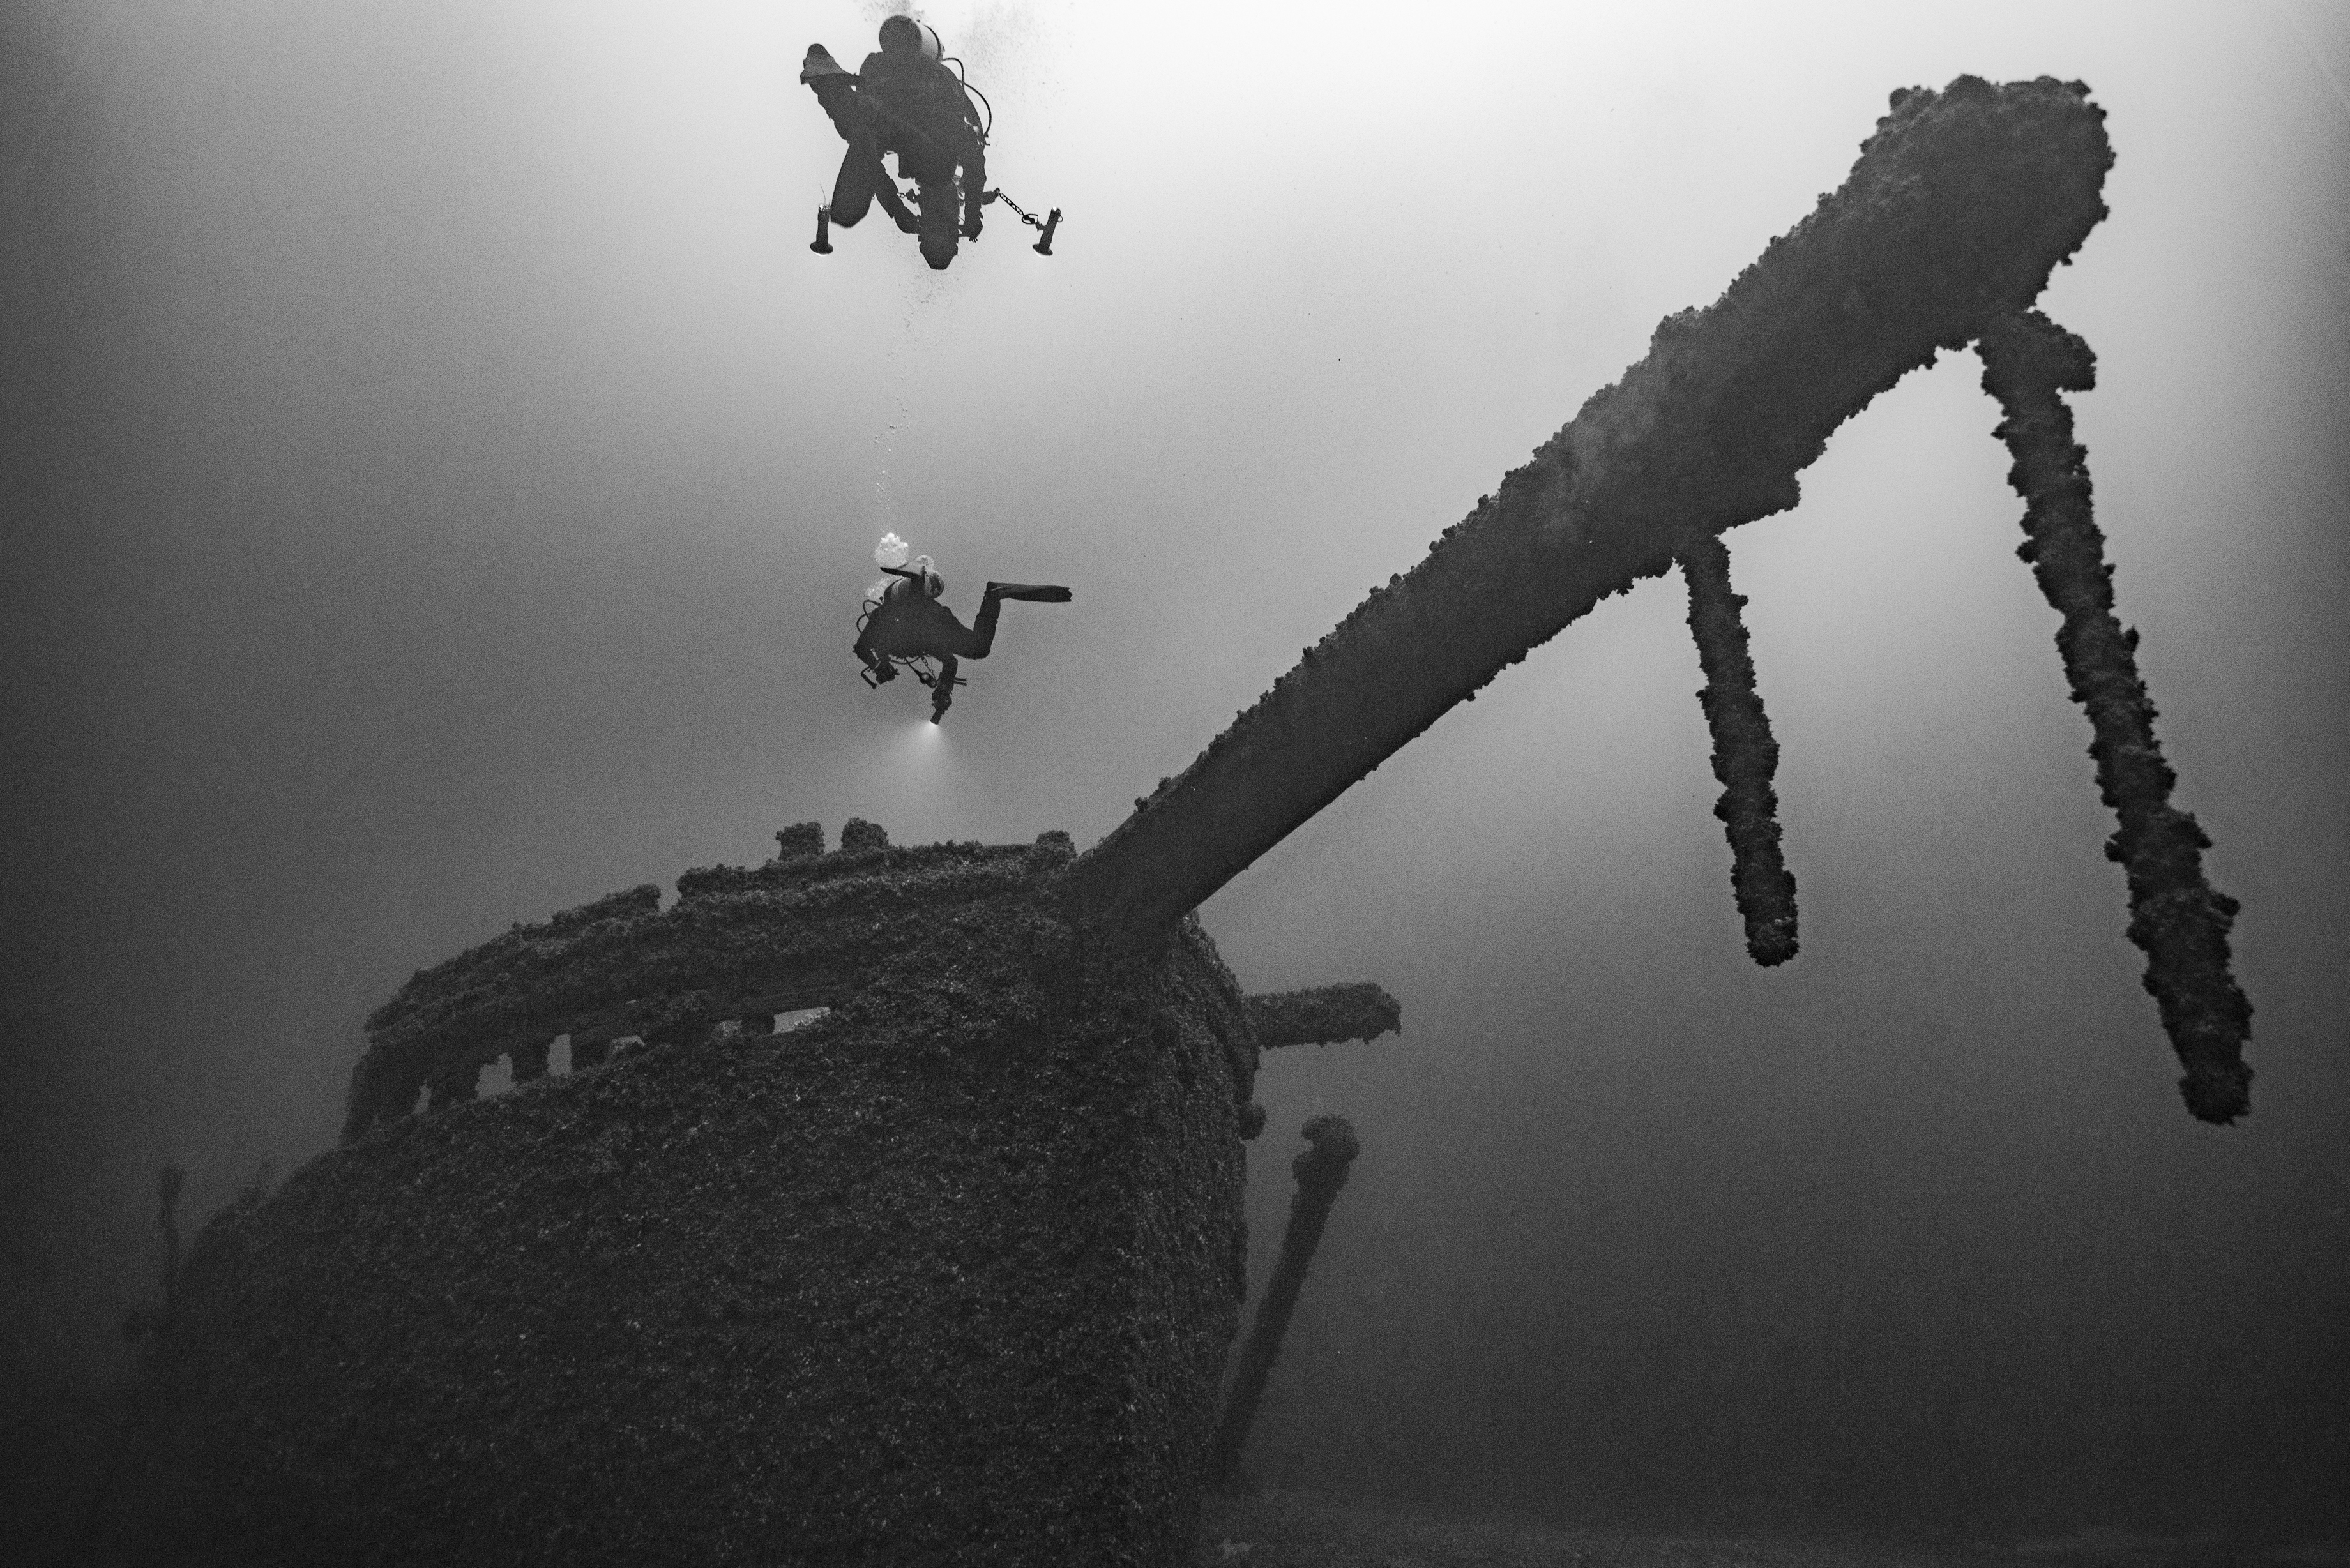 The St. Peter shipwreck